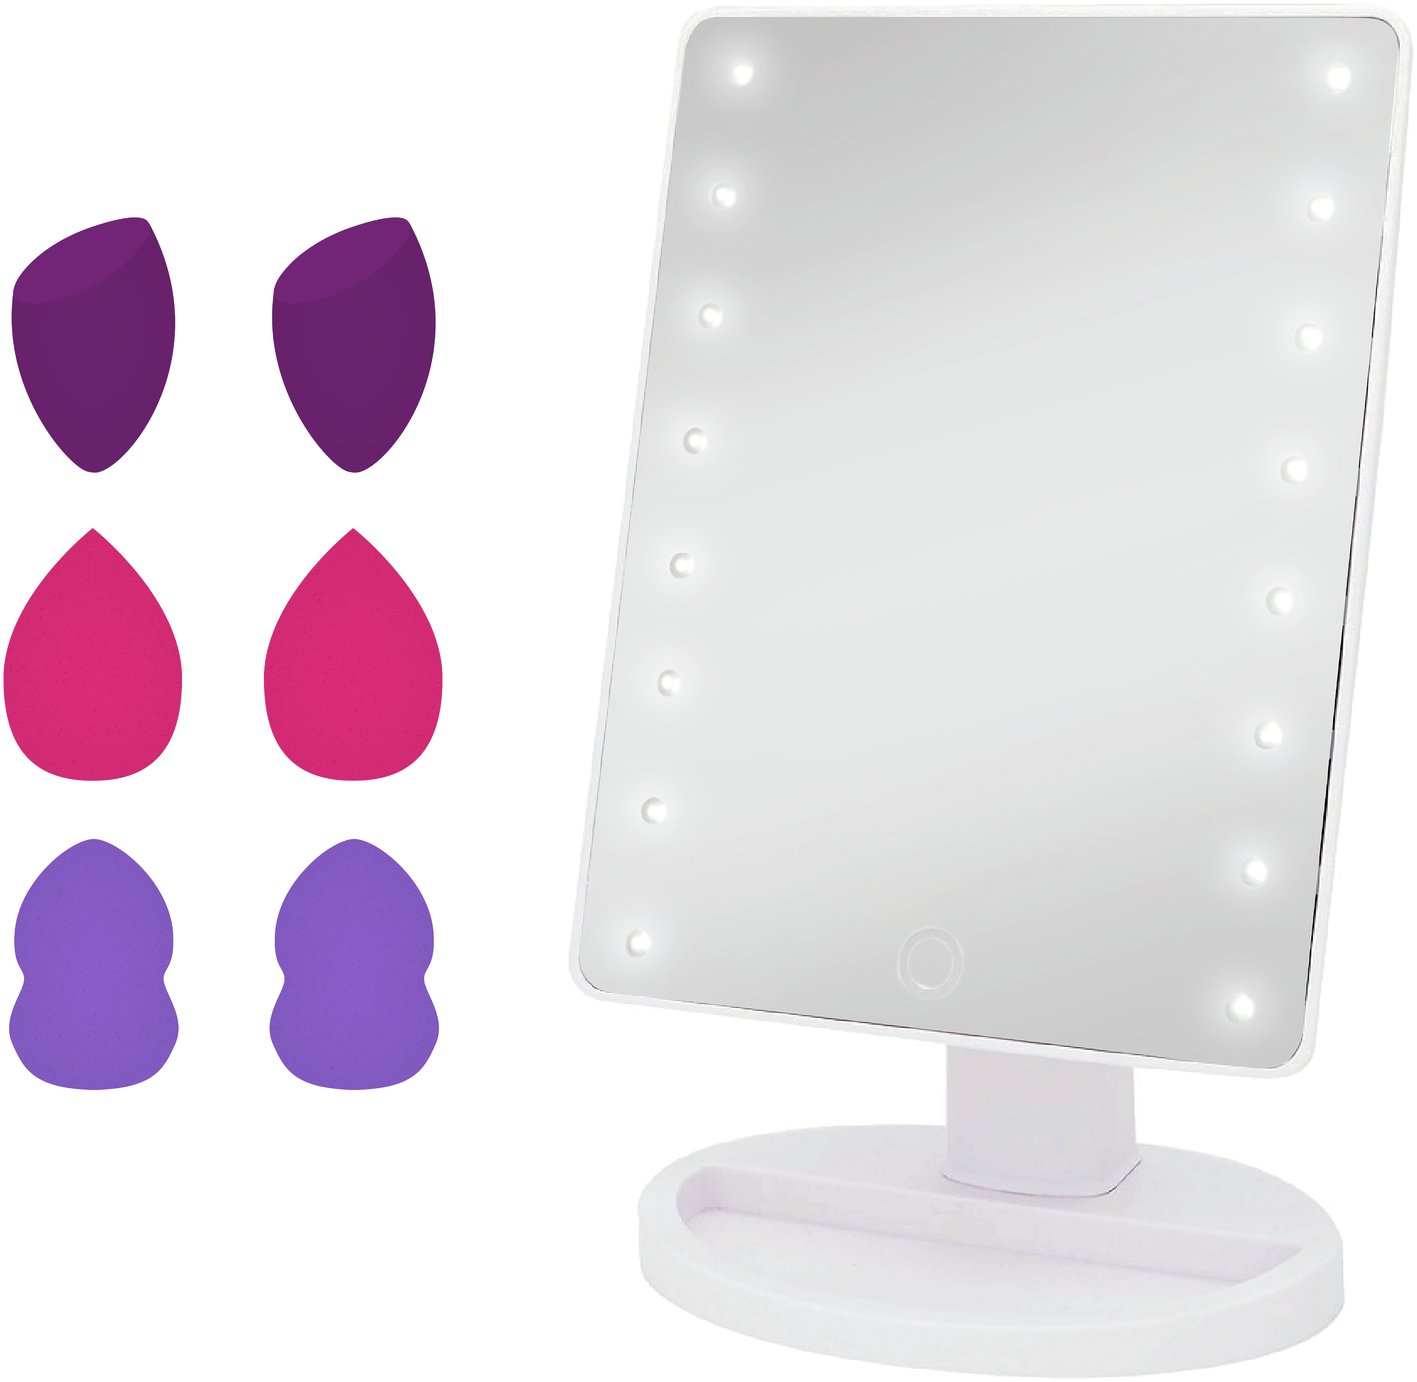 Danielle Creations LED Mirror with Sponge Variety